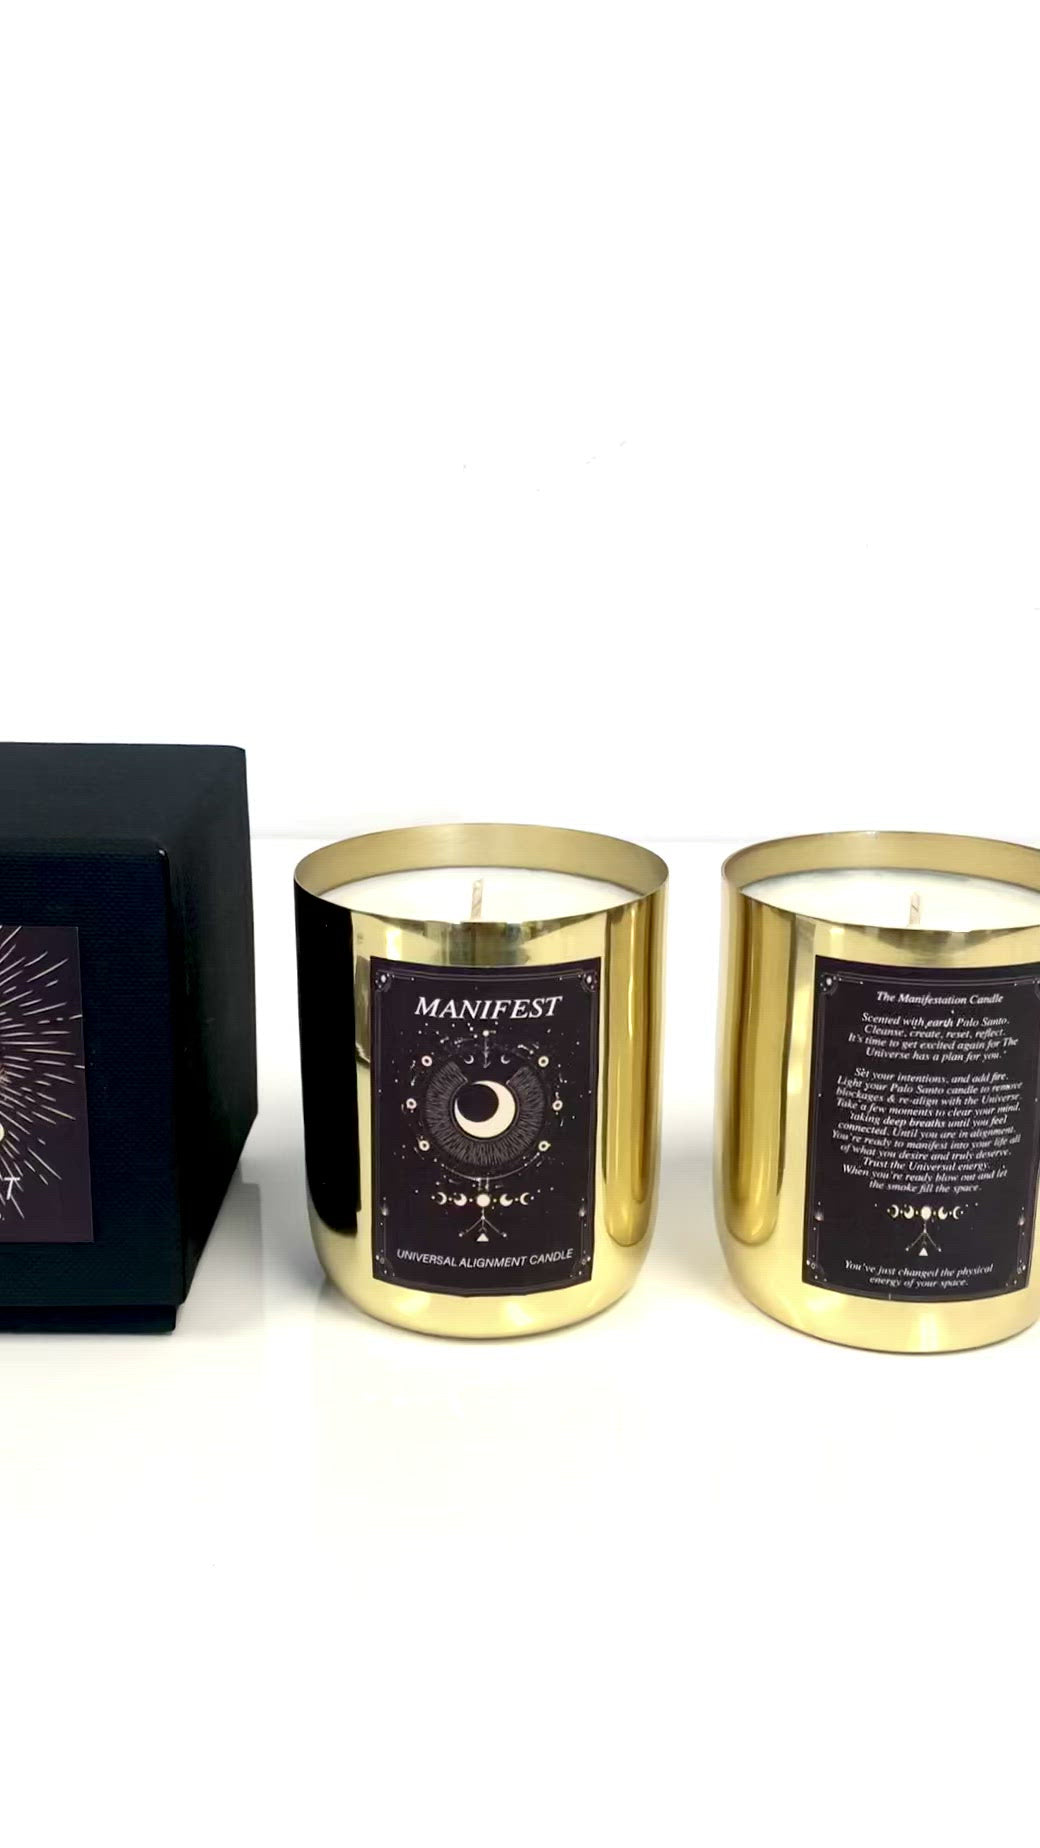 Gold and black palo santo scented candles by The Luxe Candle Co